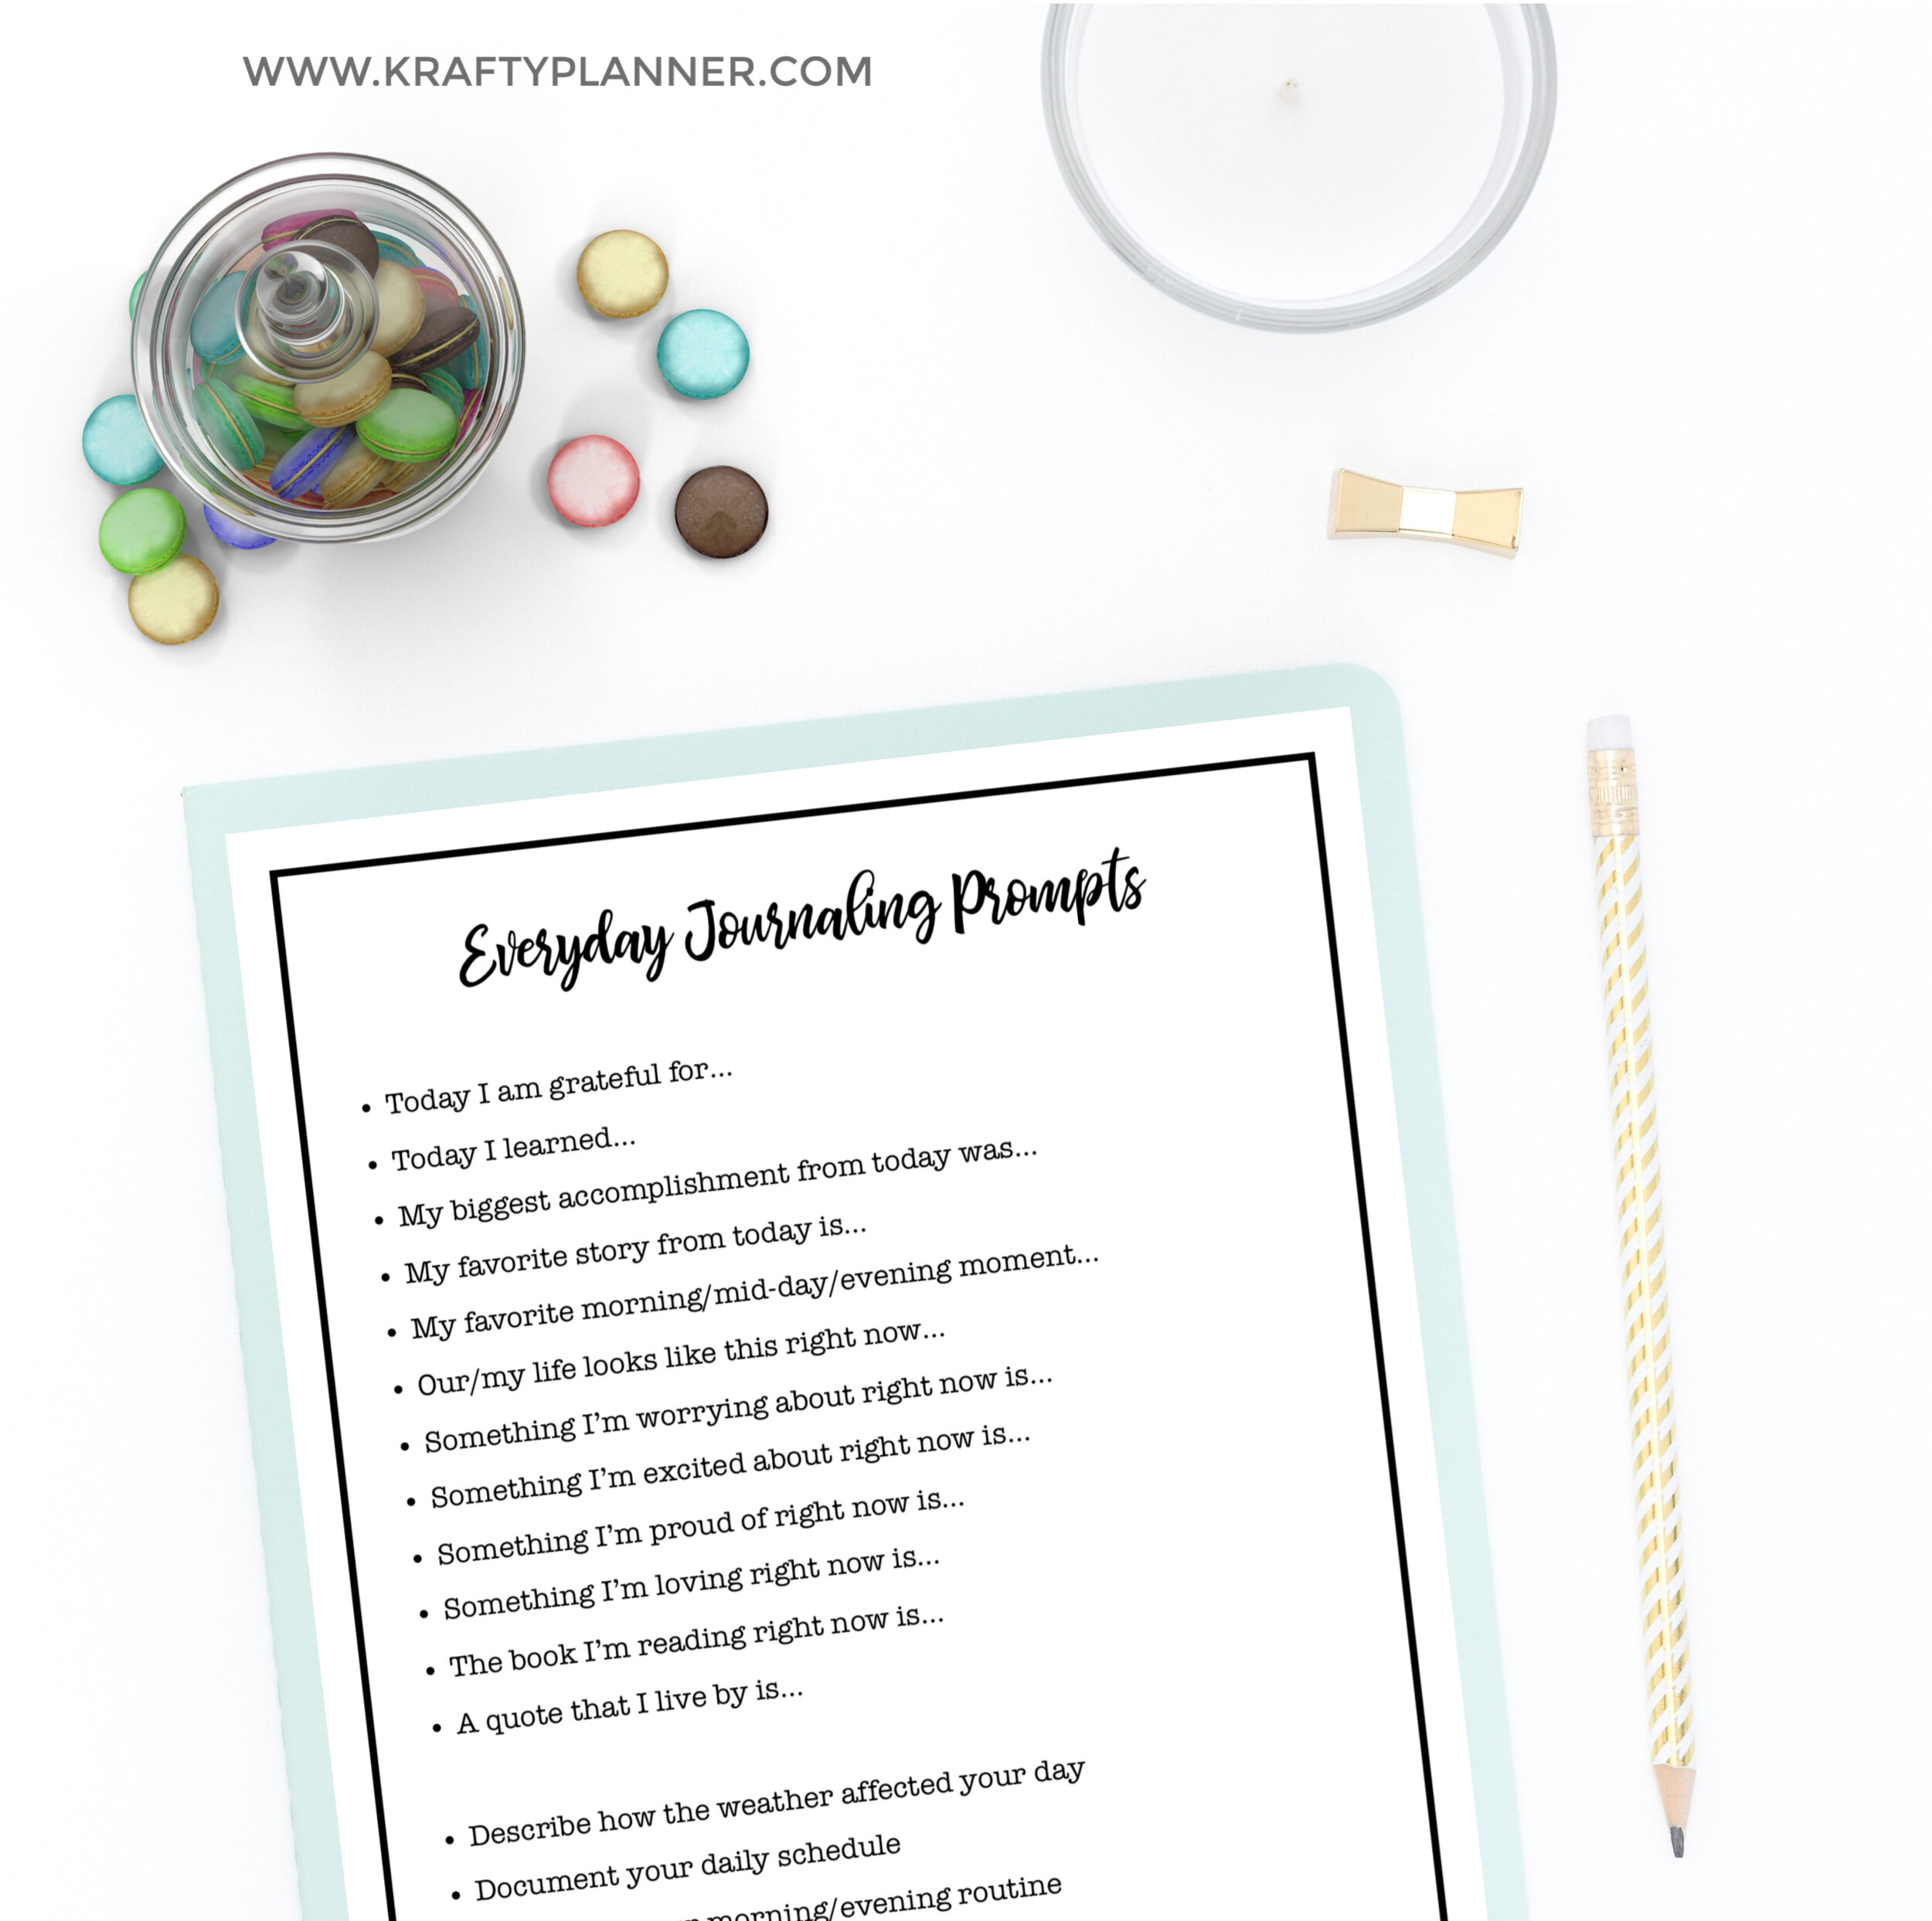 Everyday Journaling Prompts